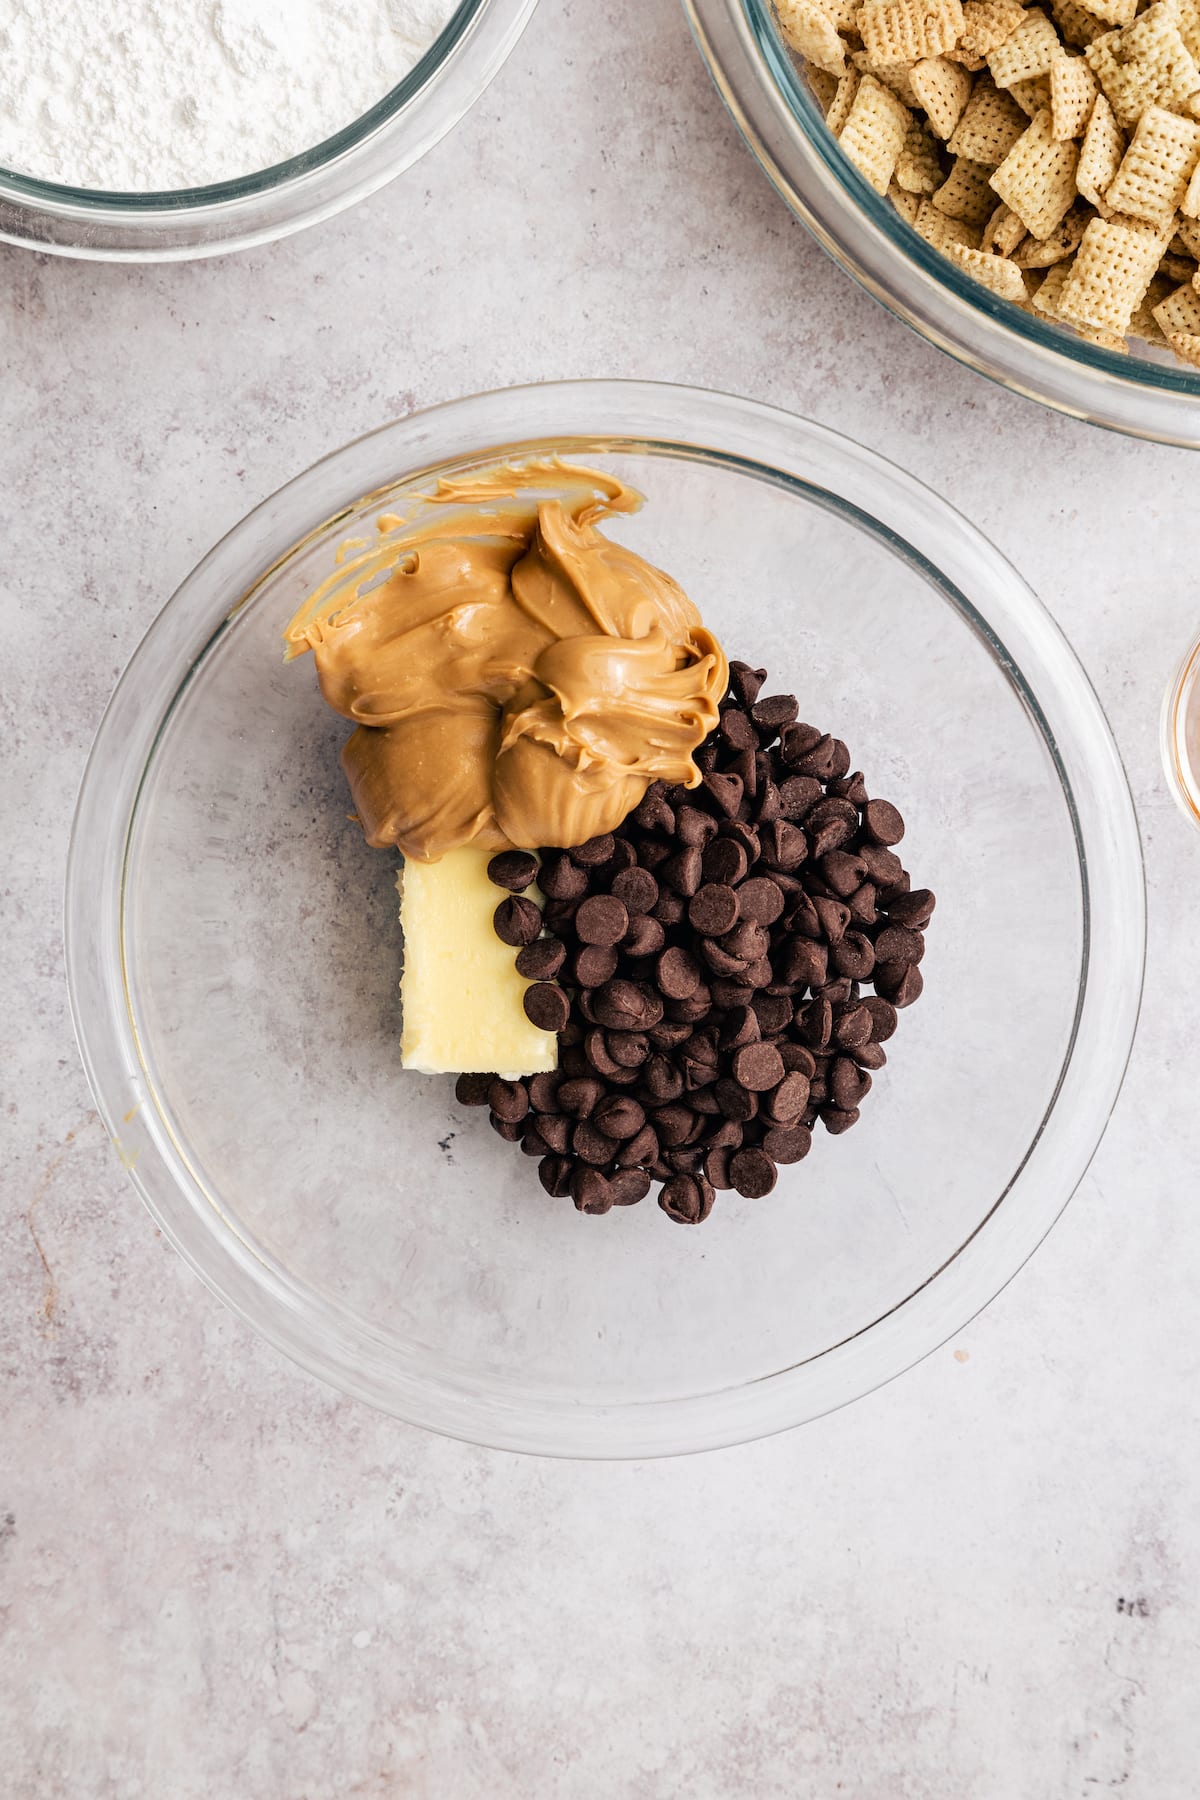 Peanut butter, chocolate chips, and butter combined in a glass mixing bowl.